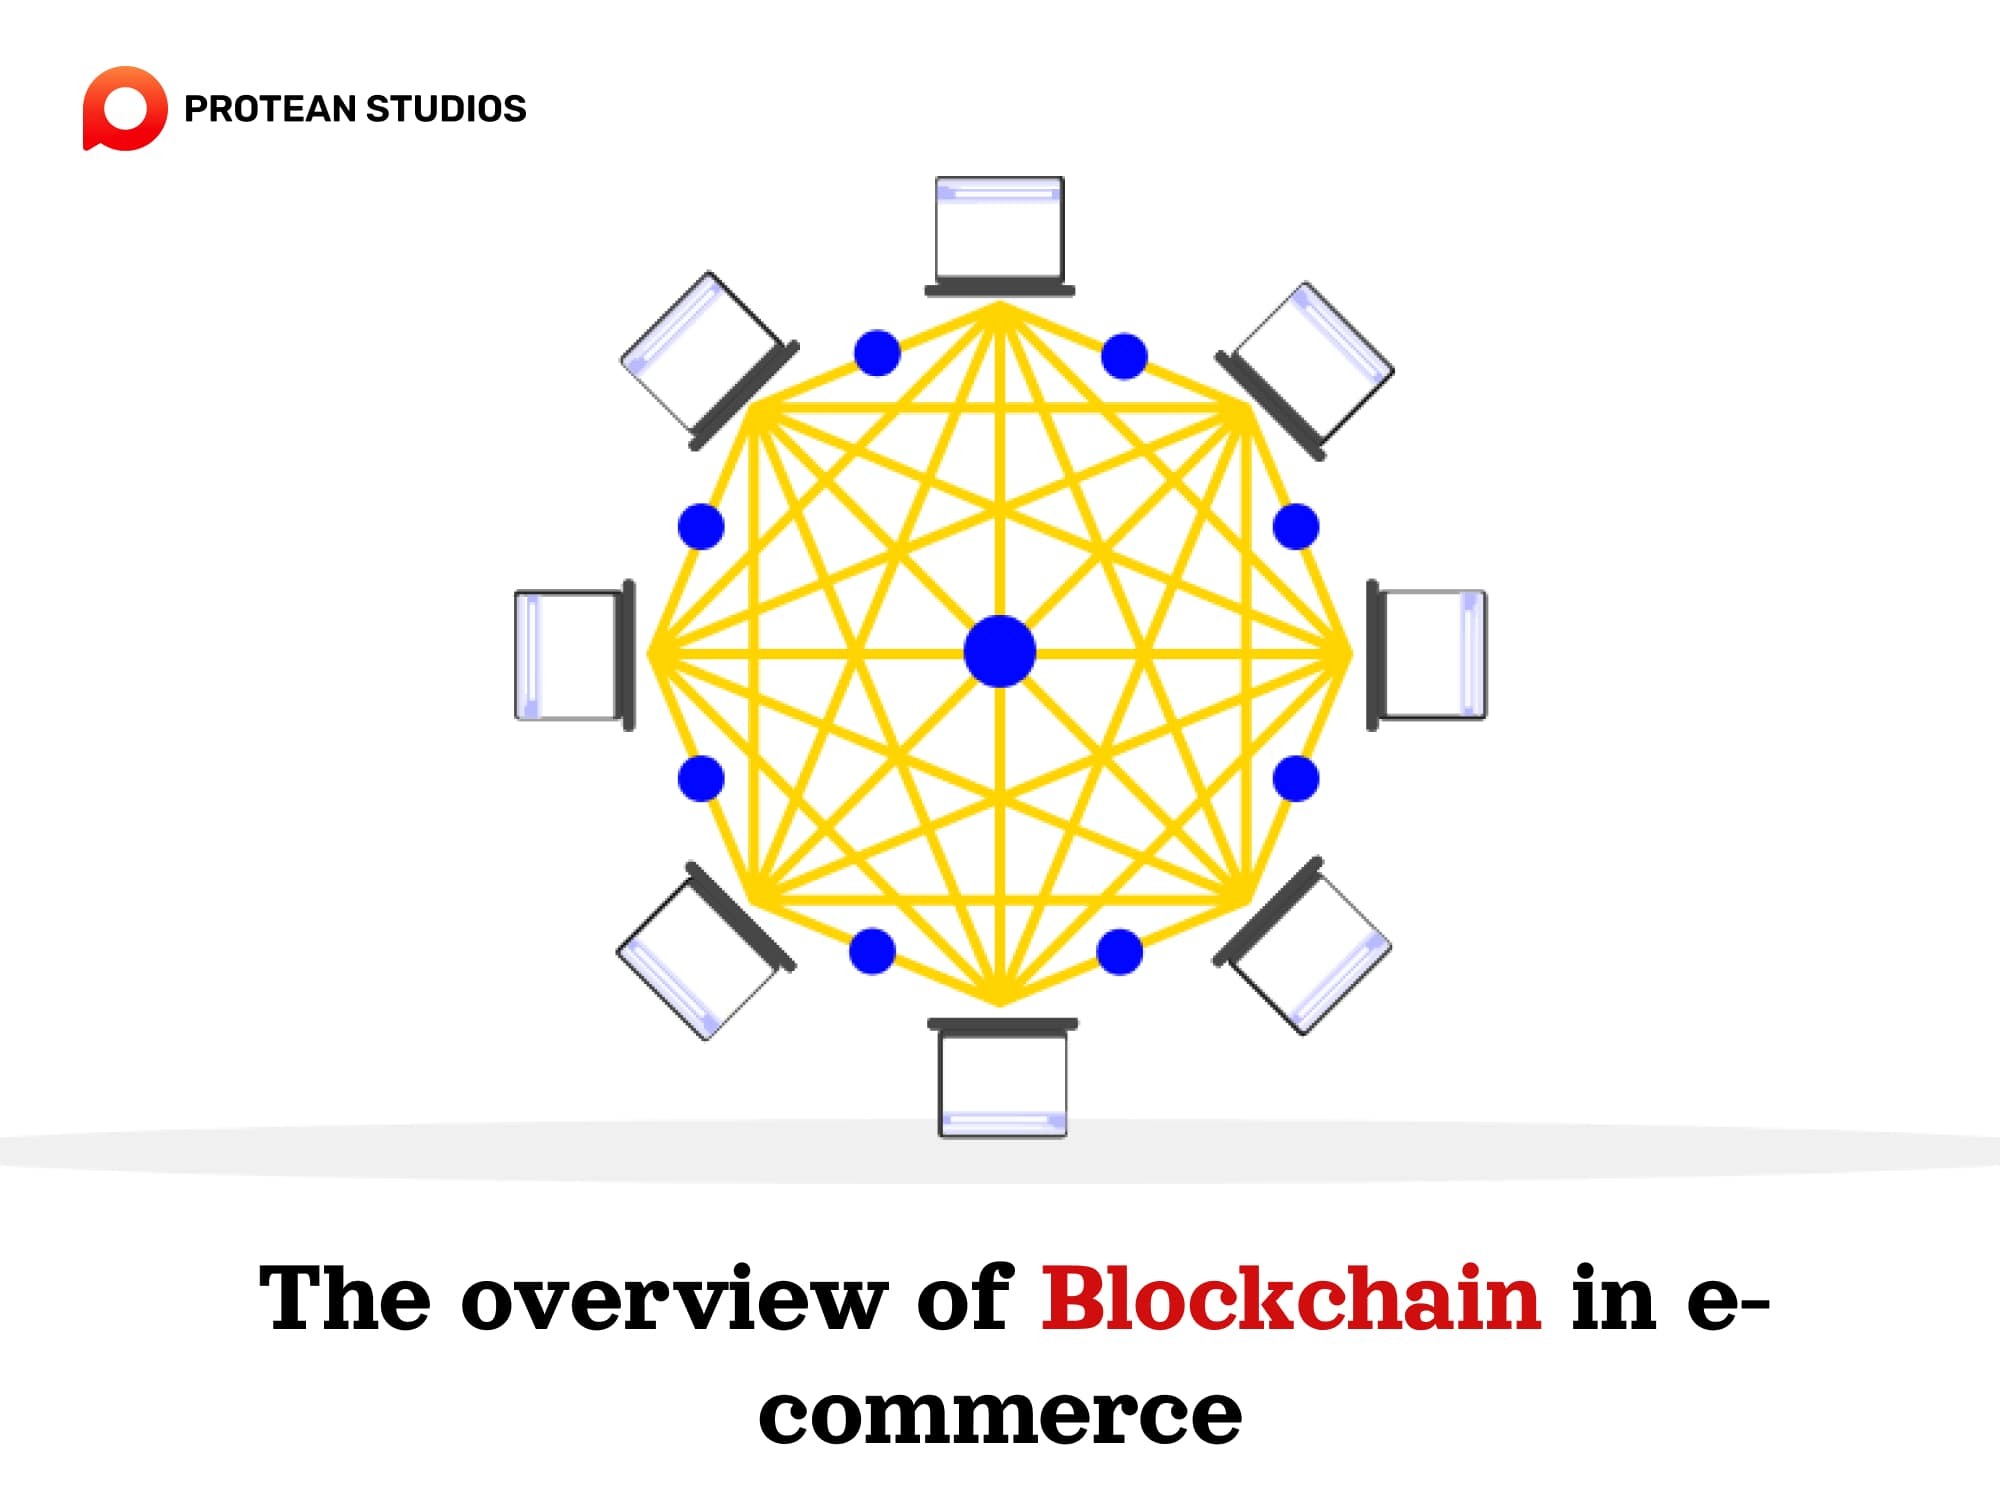 Blockchain and its features in e-commerce